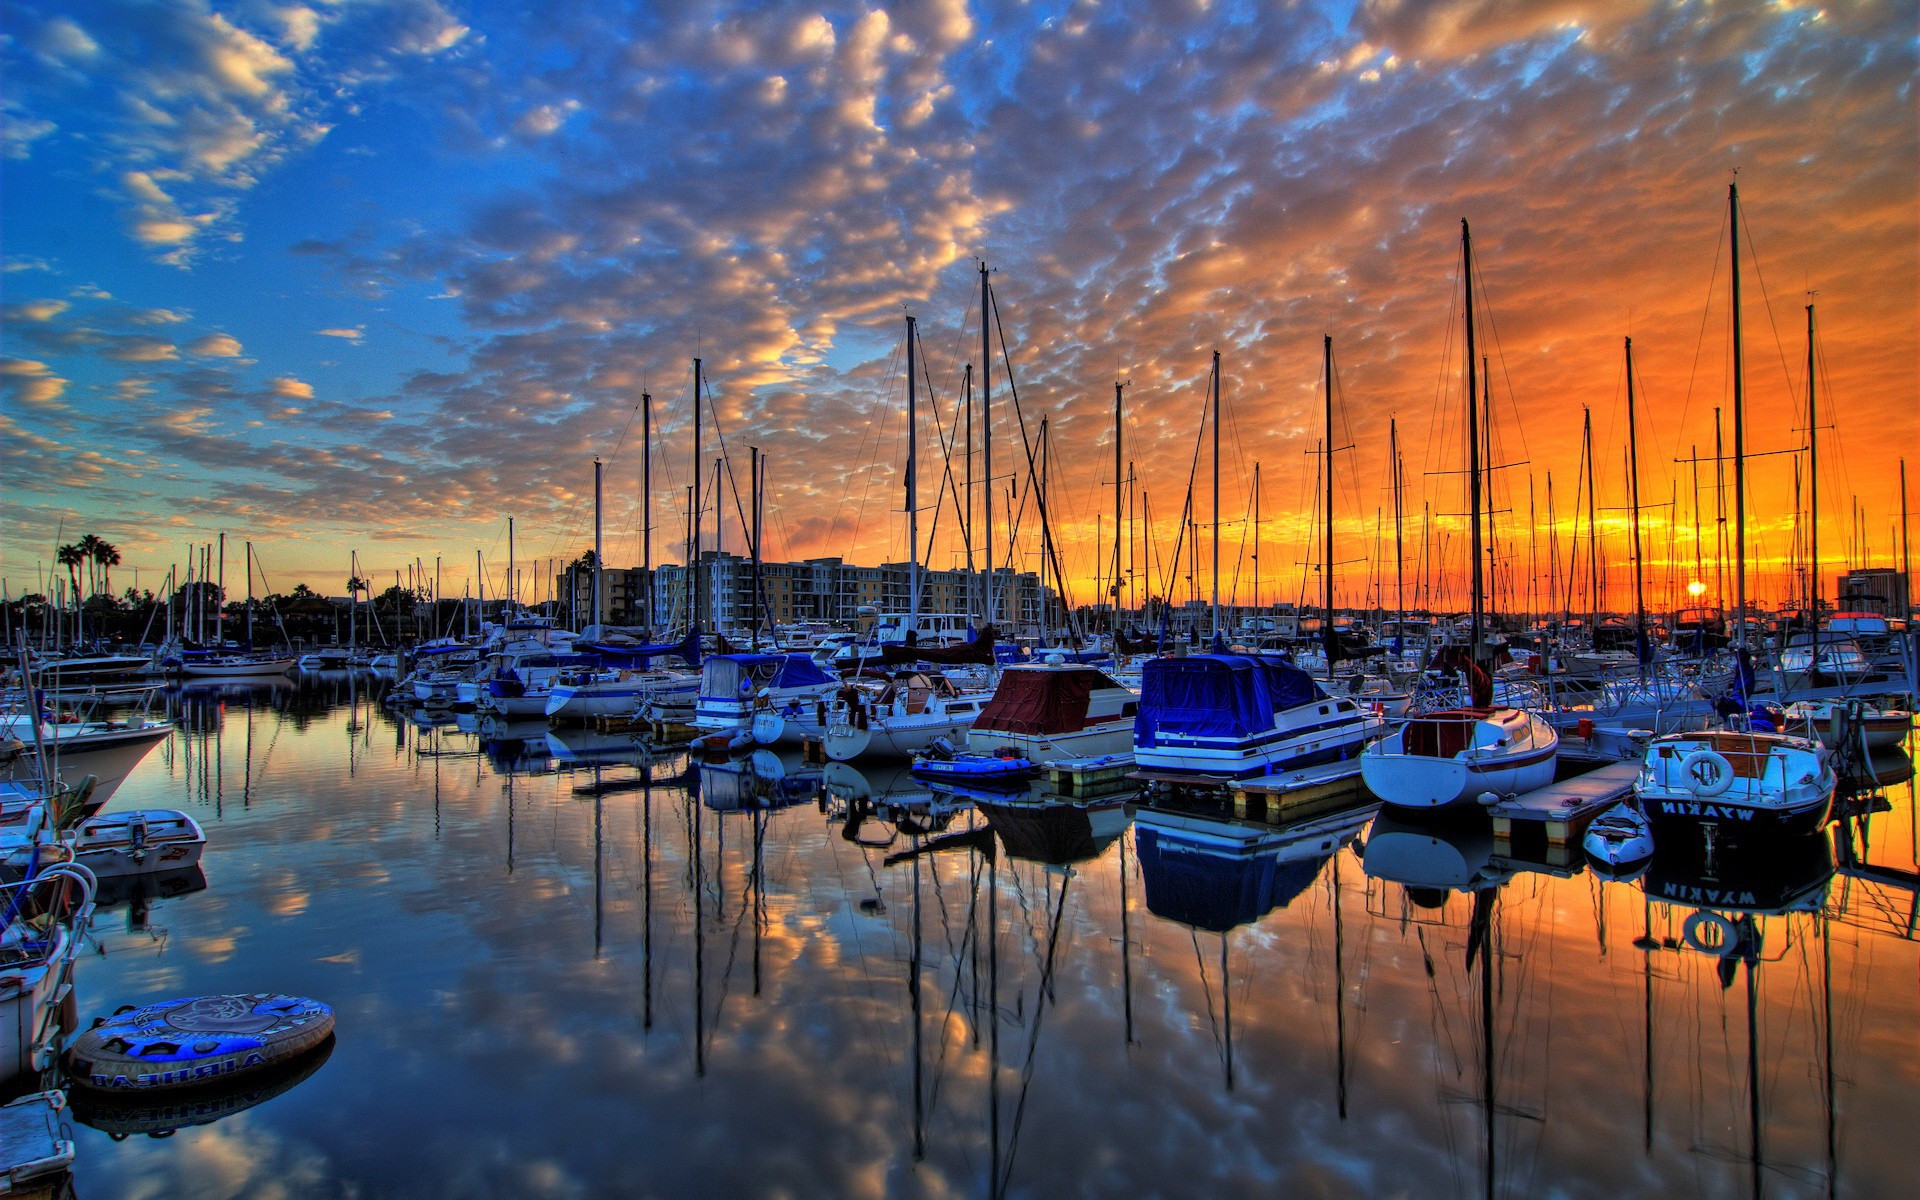 General 1920x1200 reflection clouds sea harbor boat sunset HDR sky vehicle water sunlight sailboats